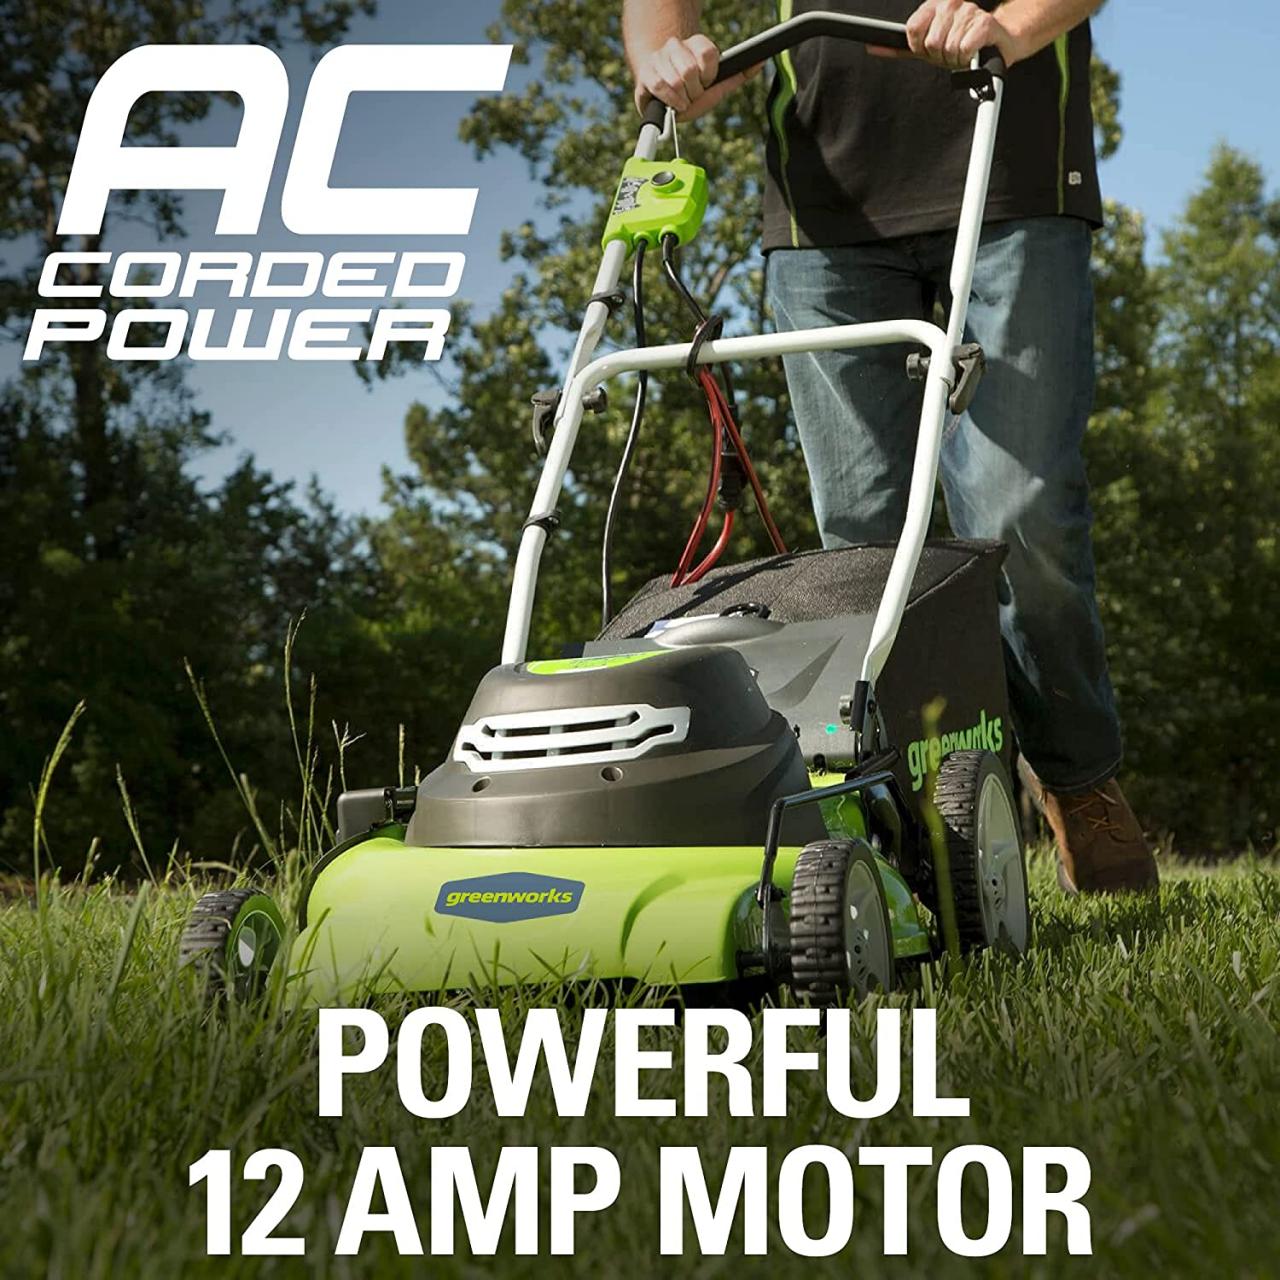 Greenworks 25012 Review - A lightweight electric lawn mower